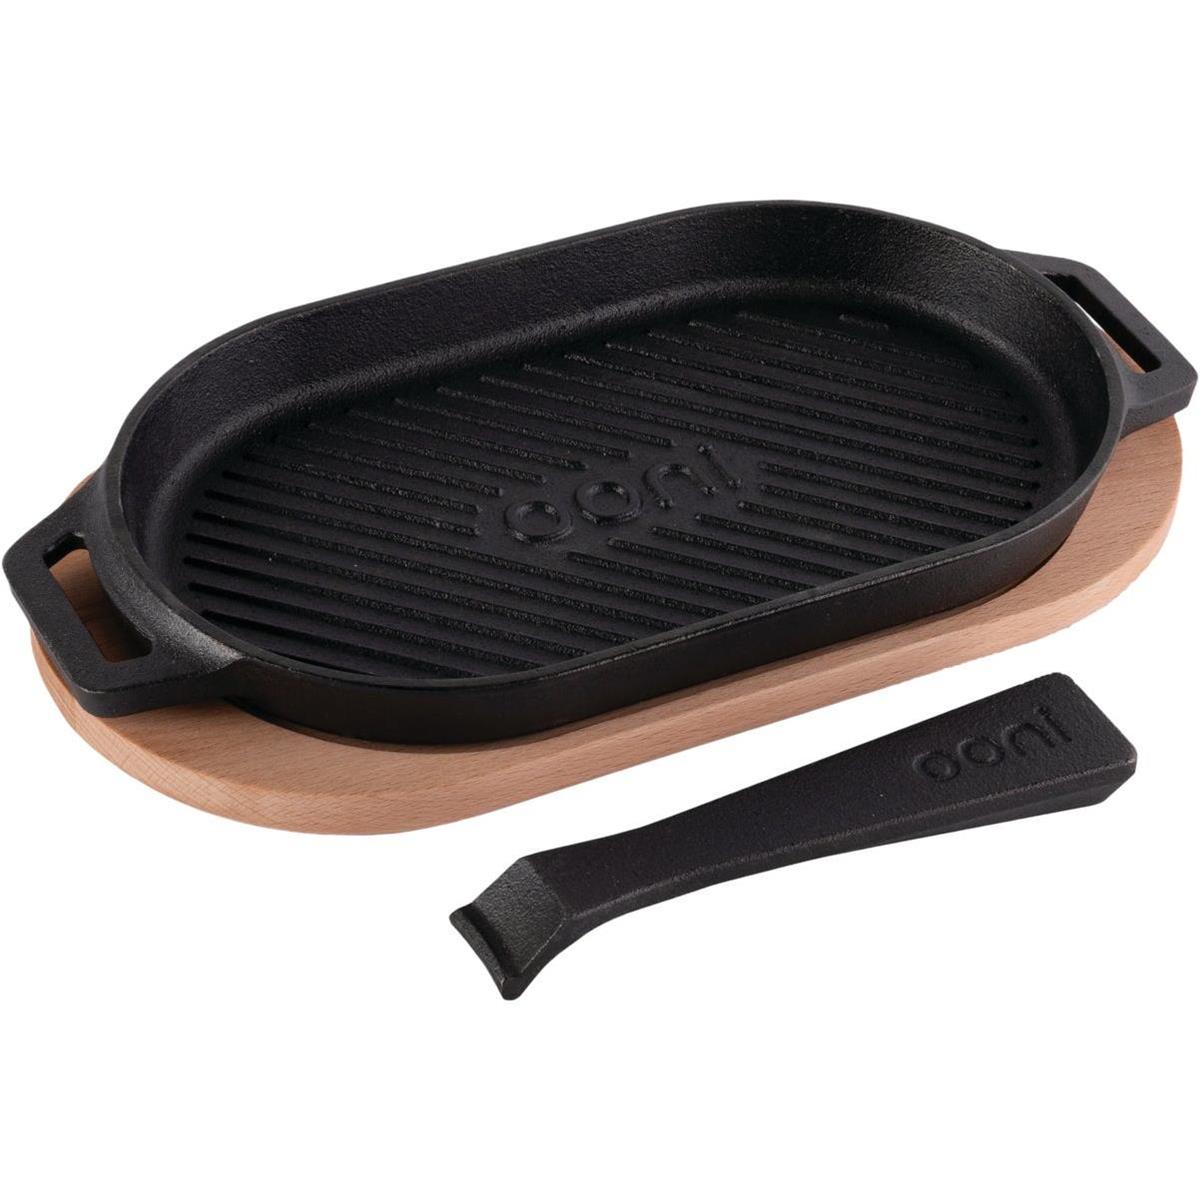 Ooni - Cast iron grill pan